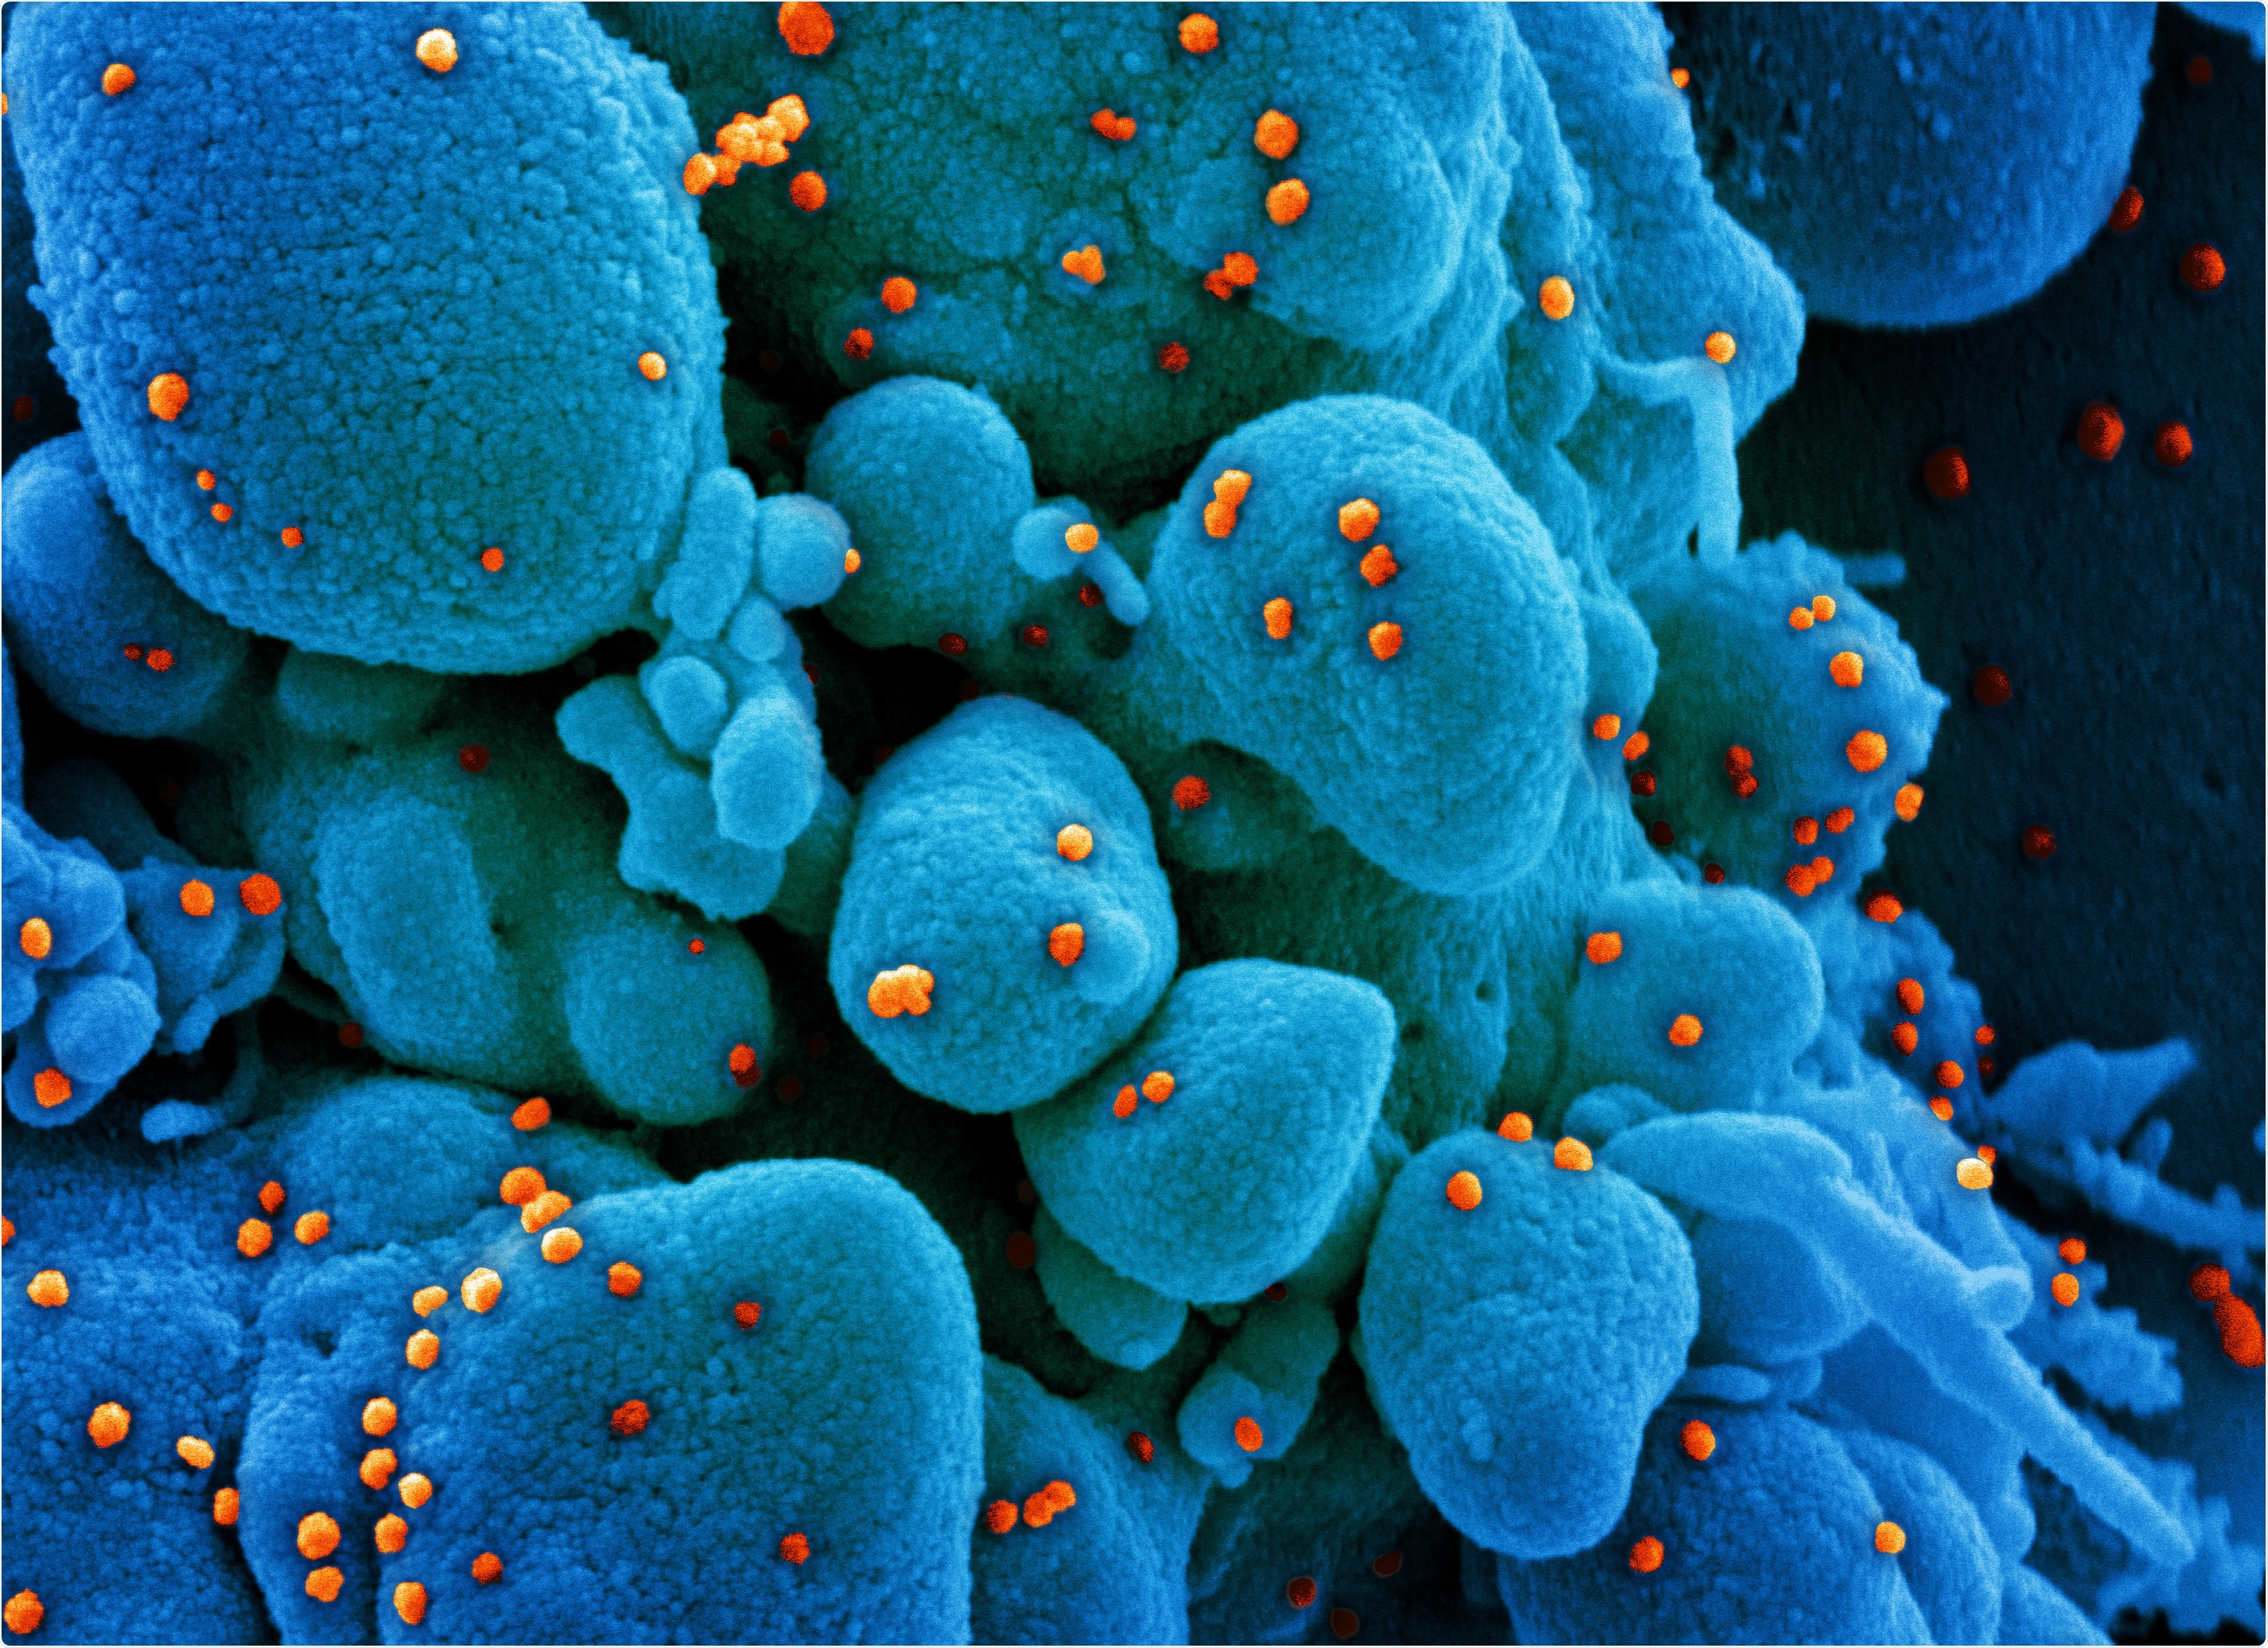 Study: Binding of phosphatidylserine-positive microparticles by PBMCs classifies disease severity in COVID-19 patients. Image Credit: NIAID